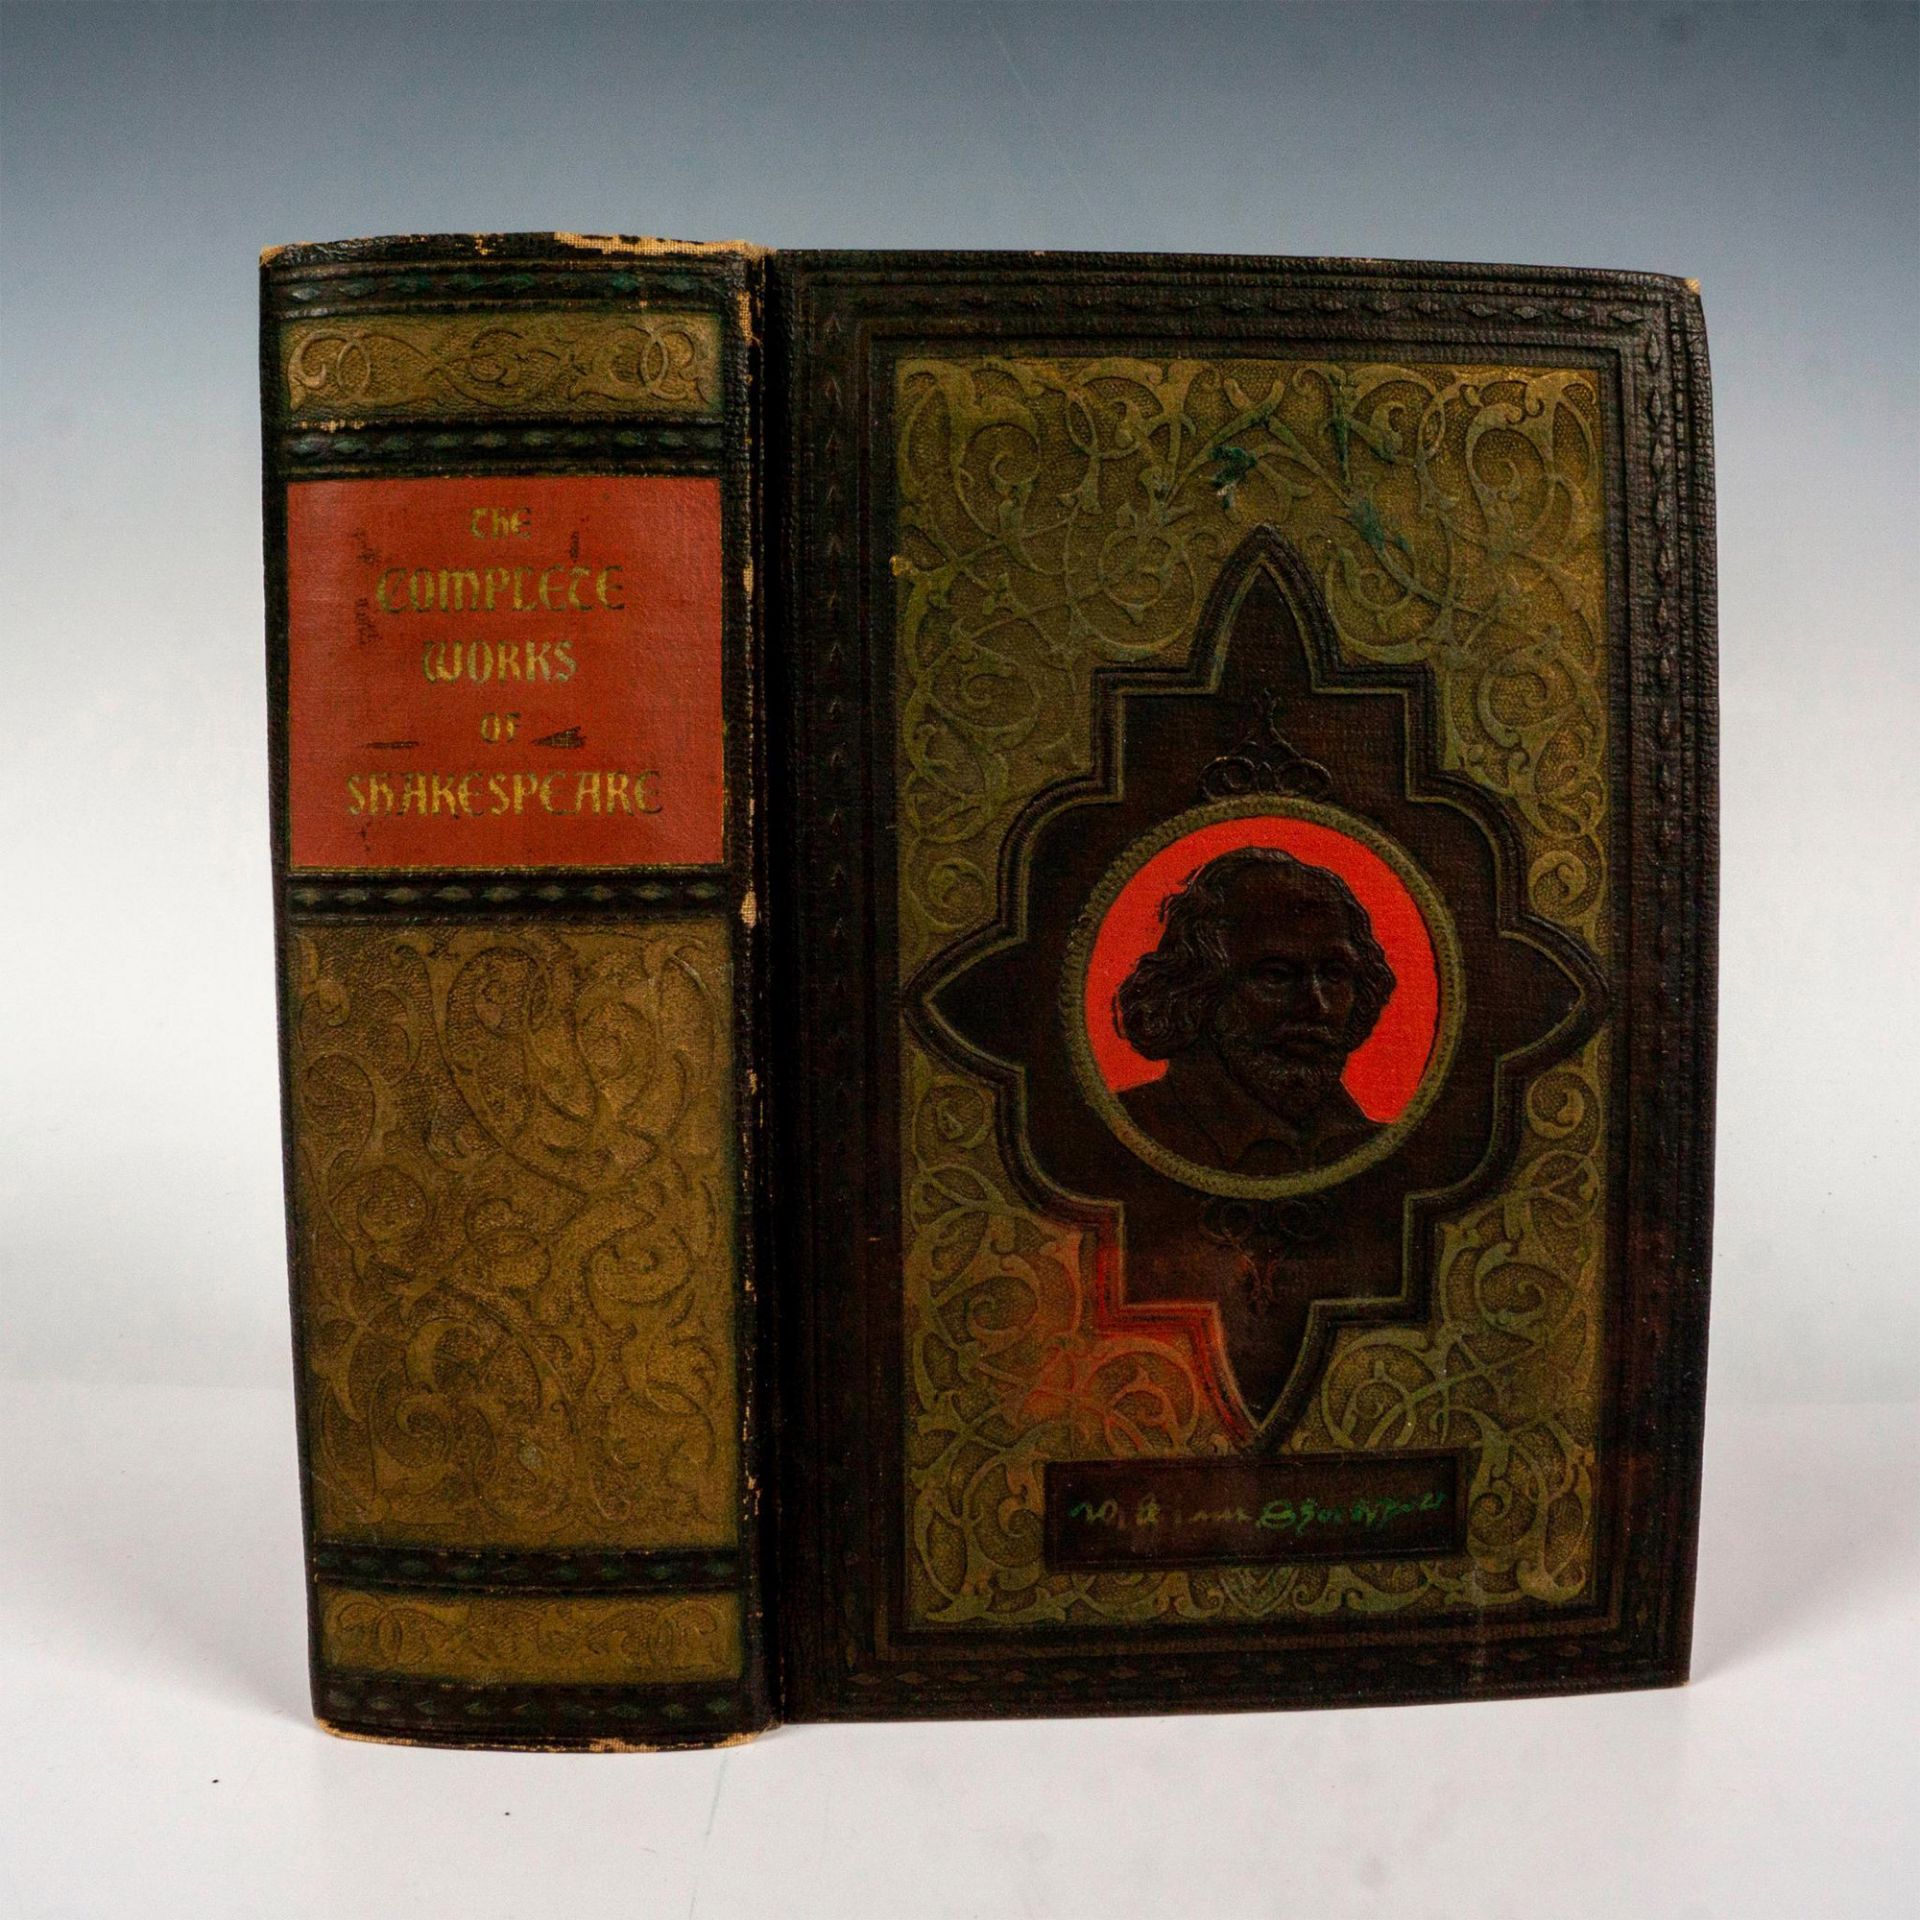 1st Edition of The Completed Works of William Shakespeare, Book